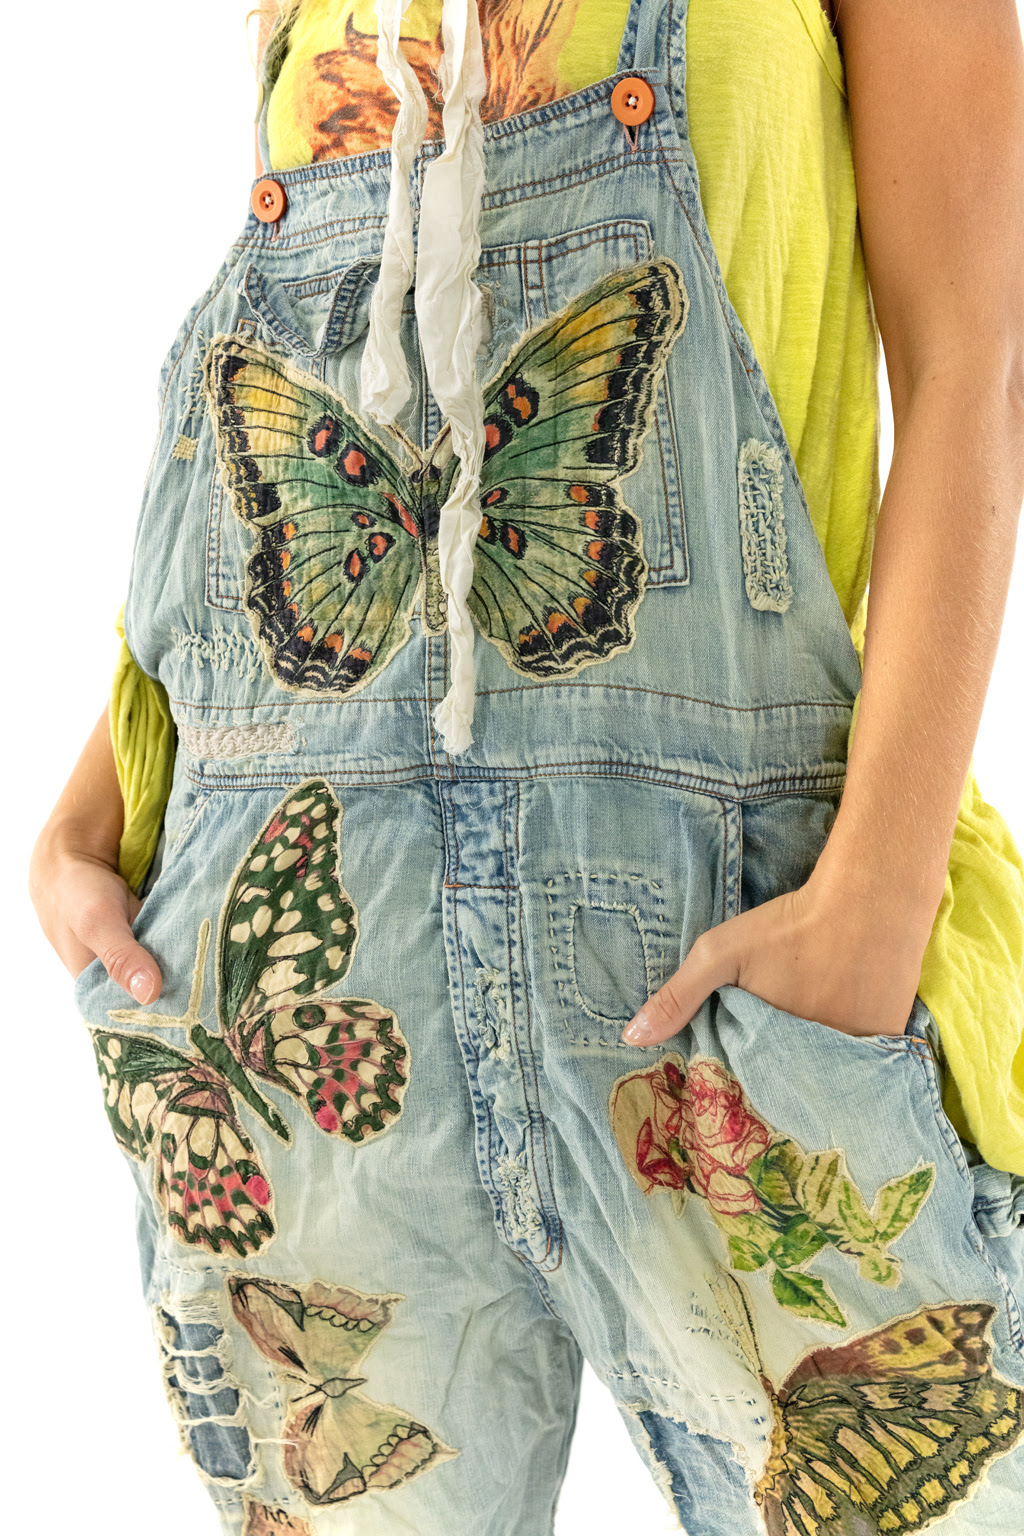 Butterfly Overalls Magnolia Pearl